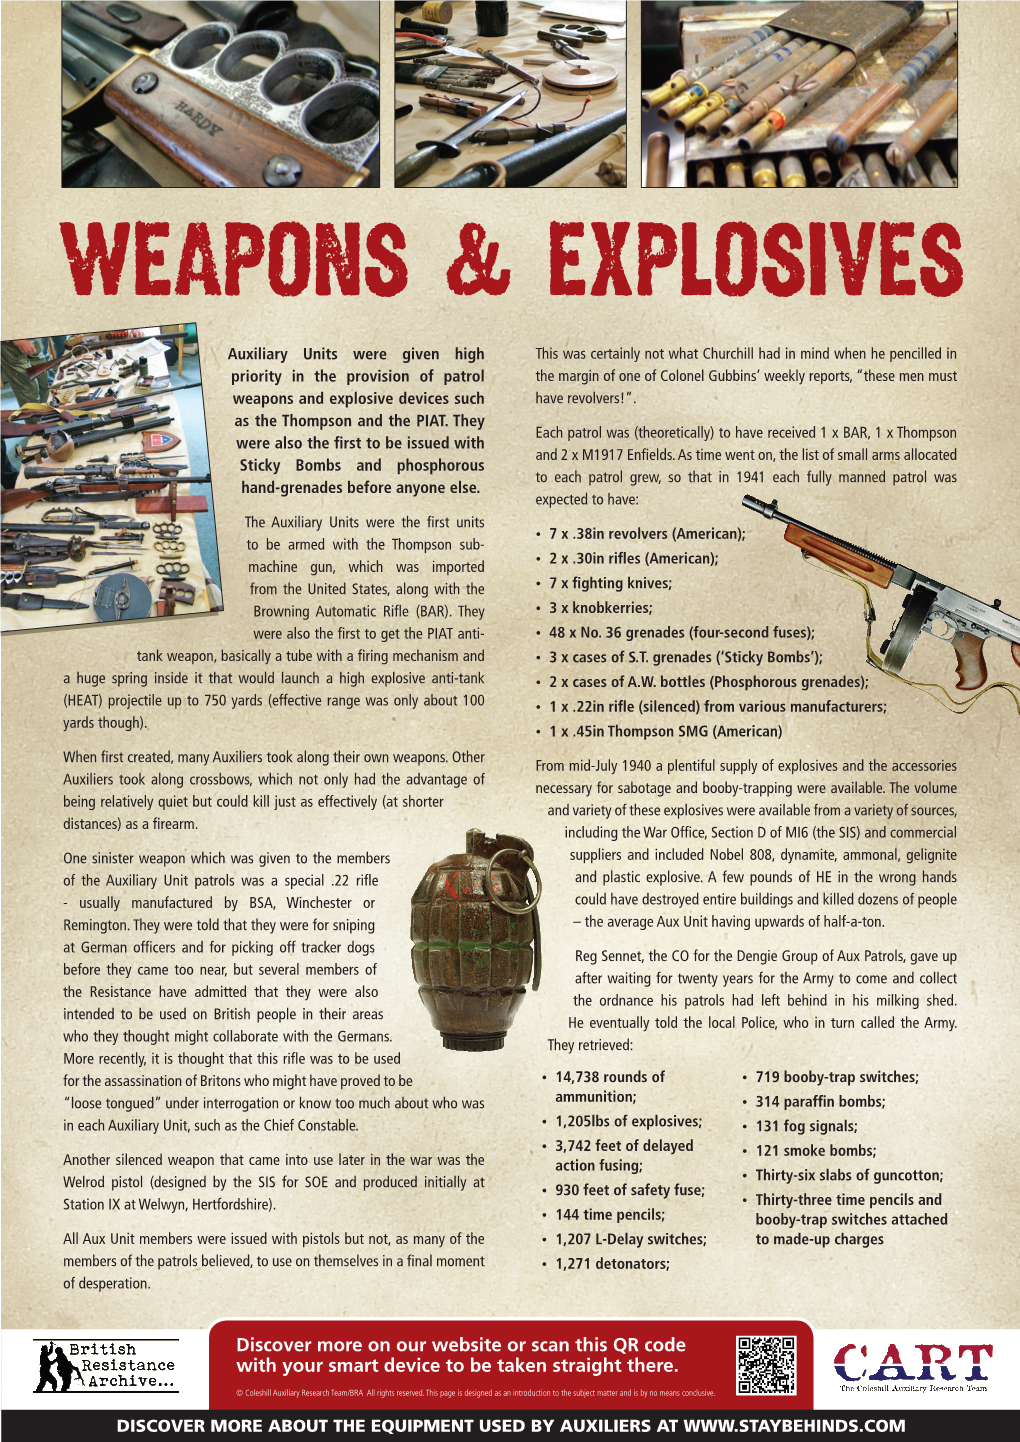 Weapons & Explosives